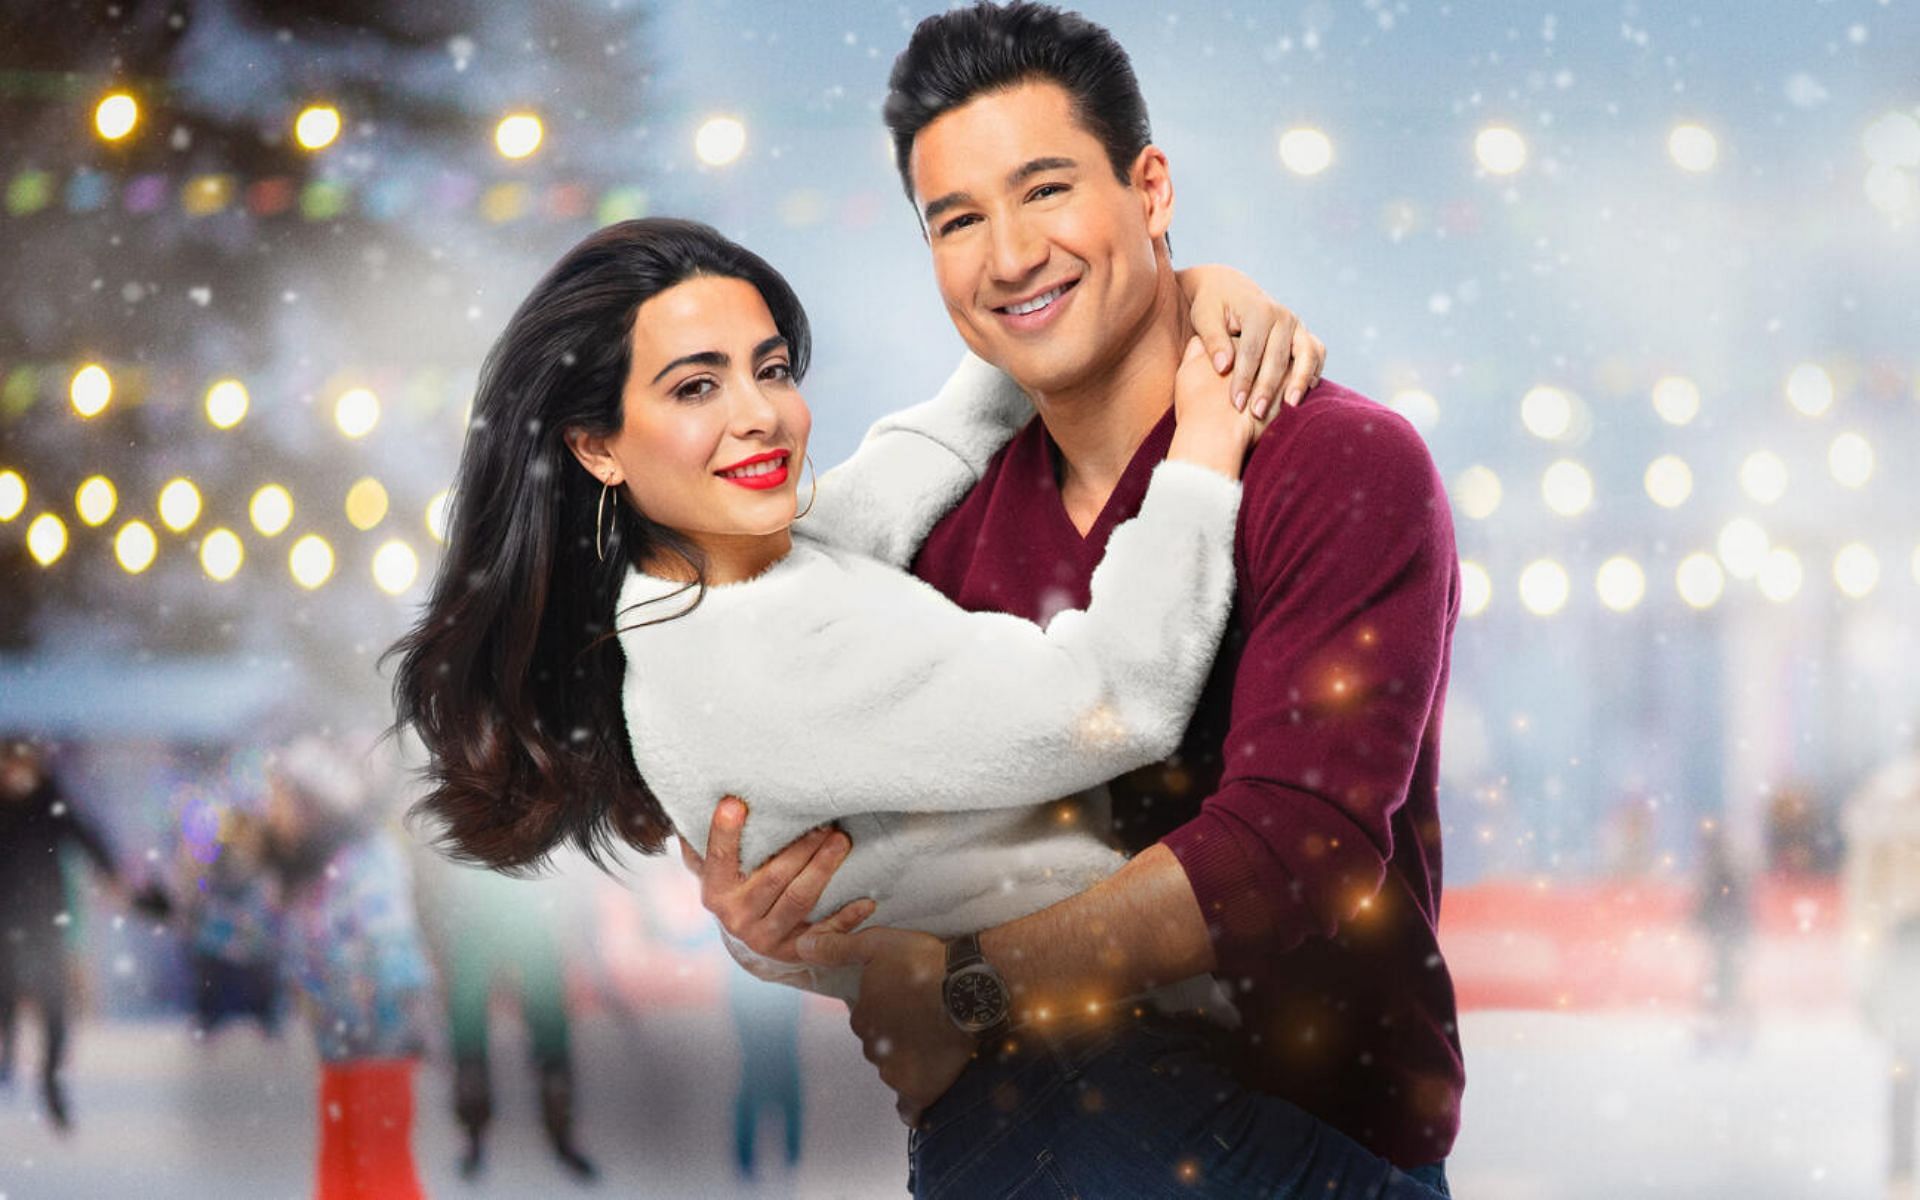 Meet the cast of &#039;Holiday in Santa Fe&#039; (Image via Lifetime)